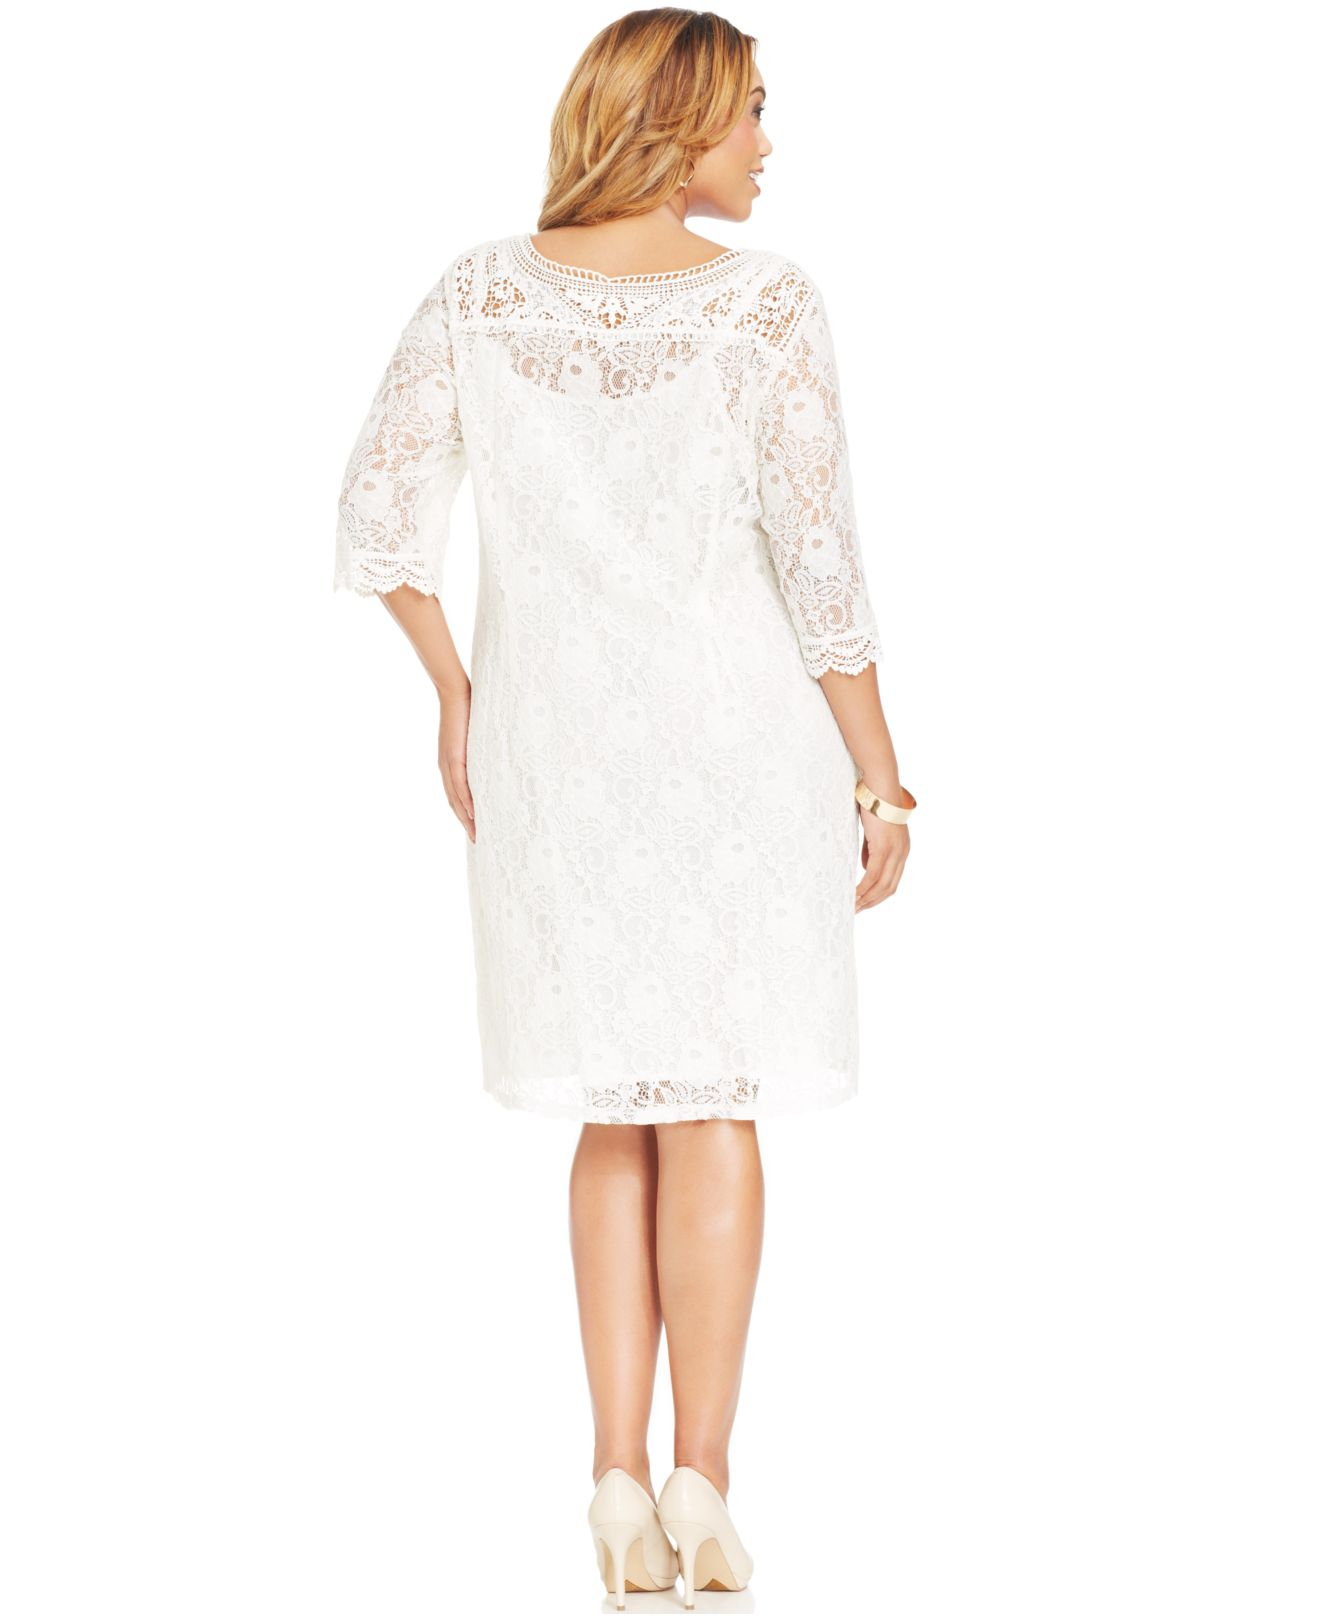 Lyst - Spense Plus Size Three-Quarter-Sleeve Lace Dress in White1320 x 1616